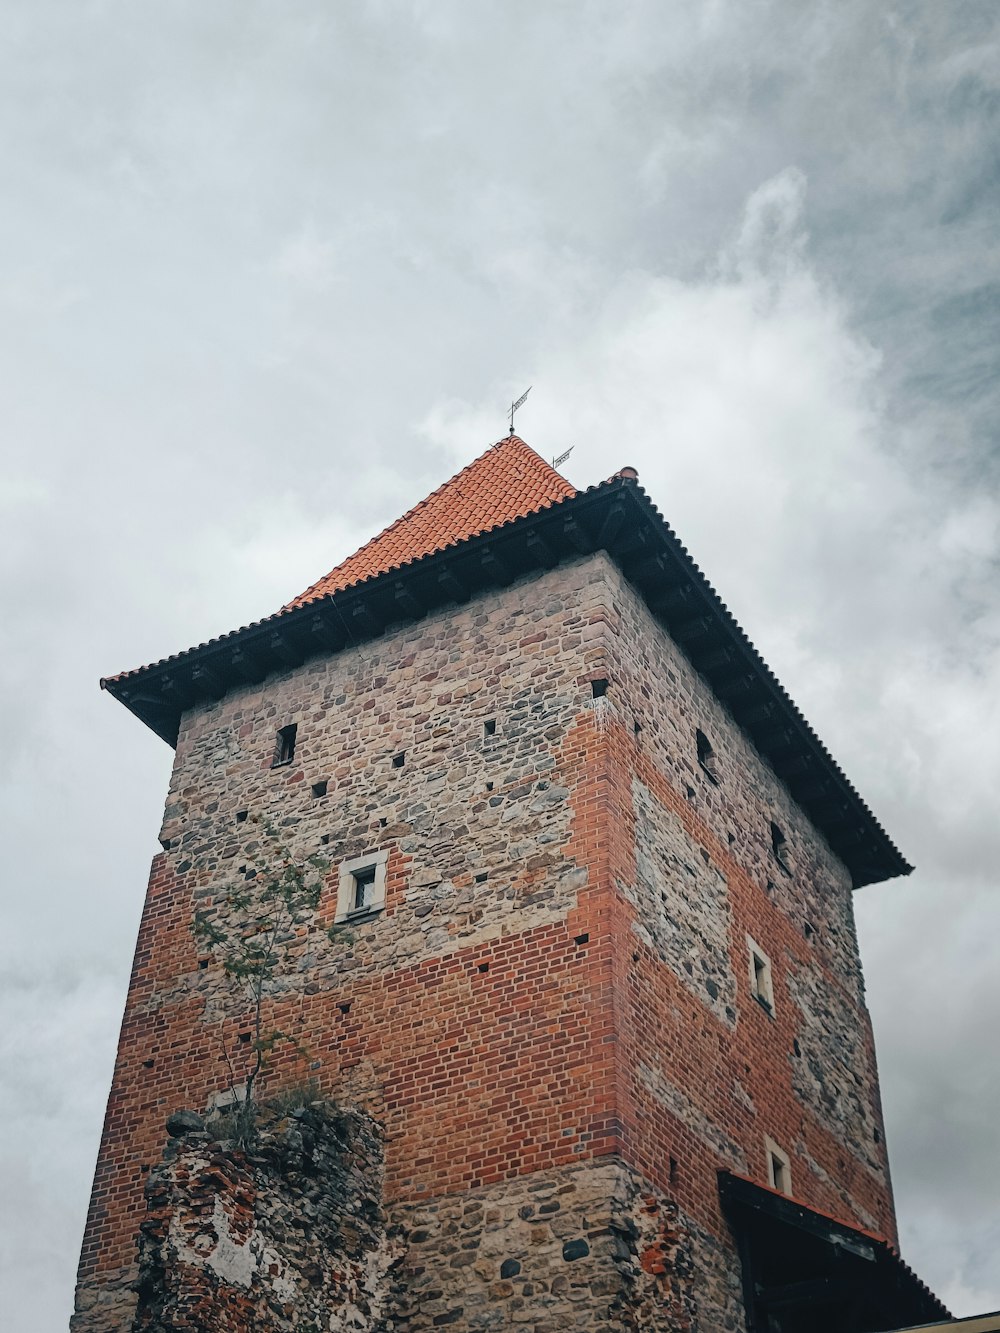 a brick tower with a cross on top